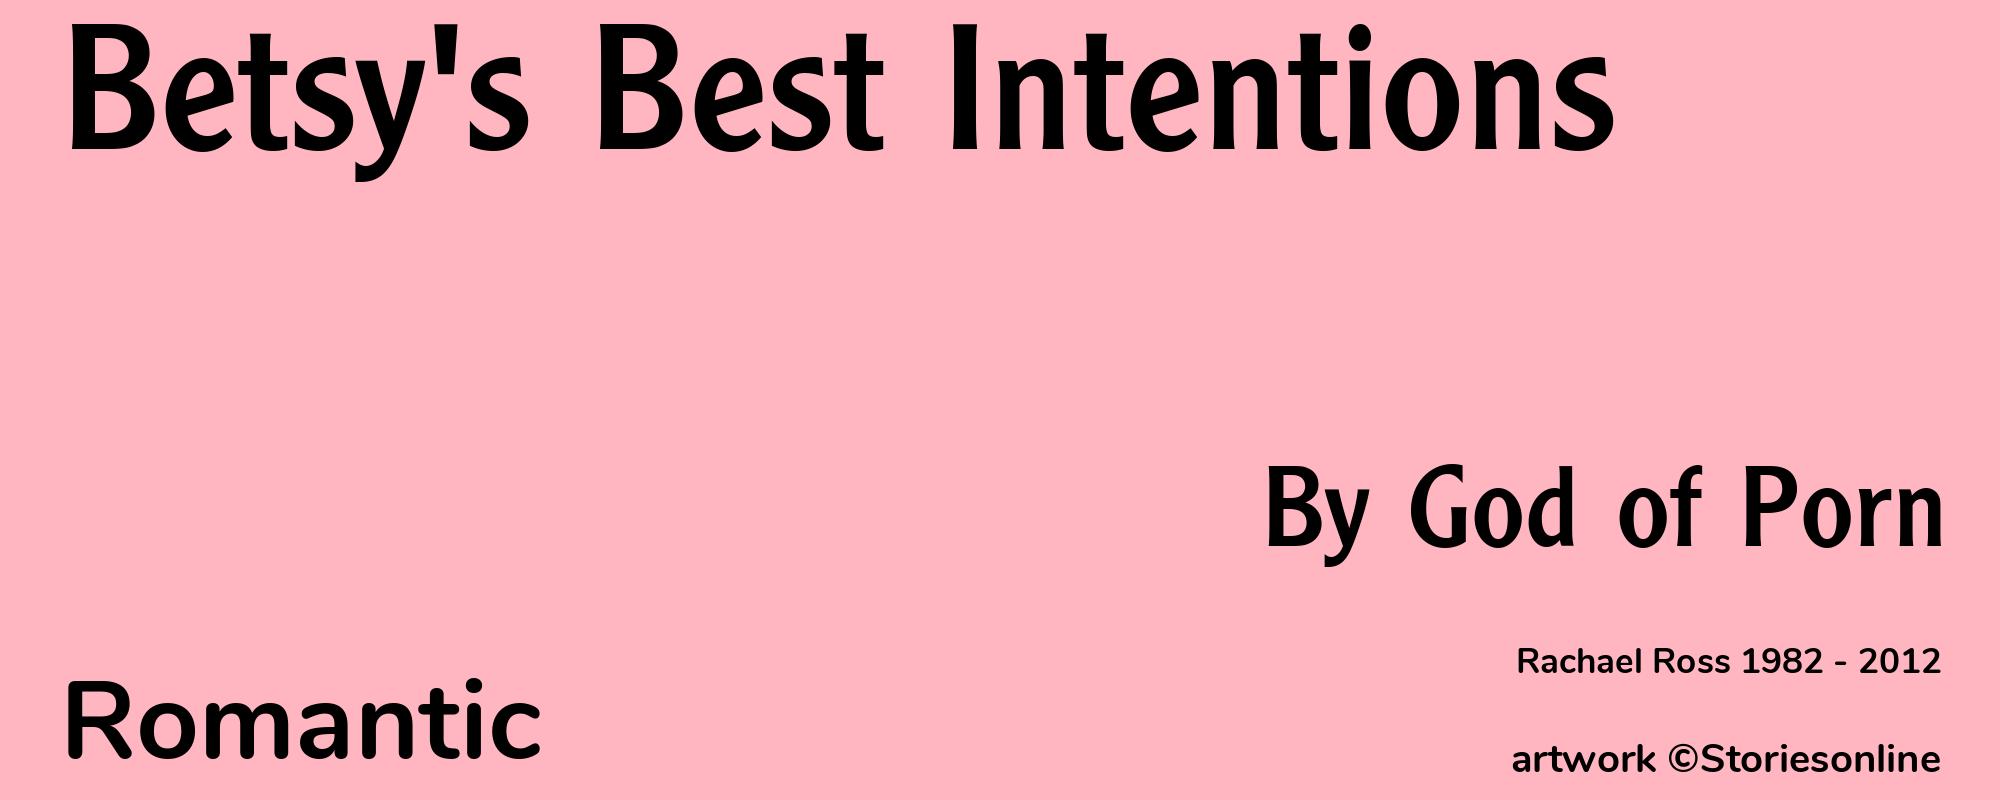 Betsy's Best Intentions - Cover